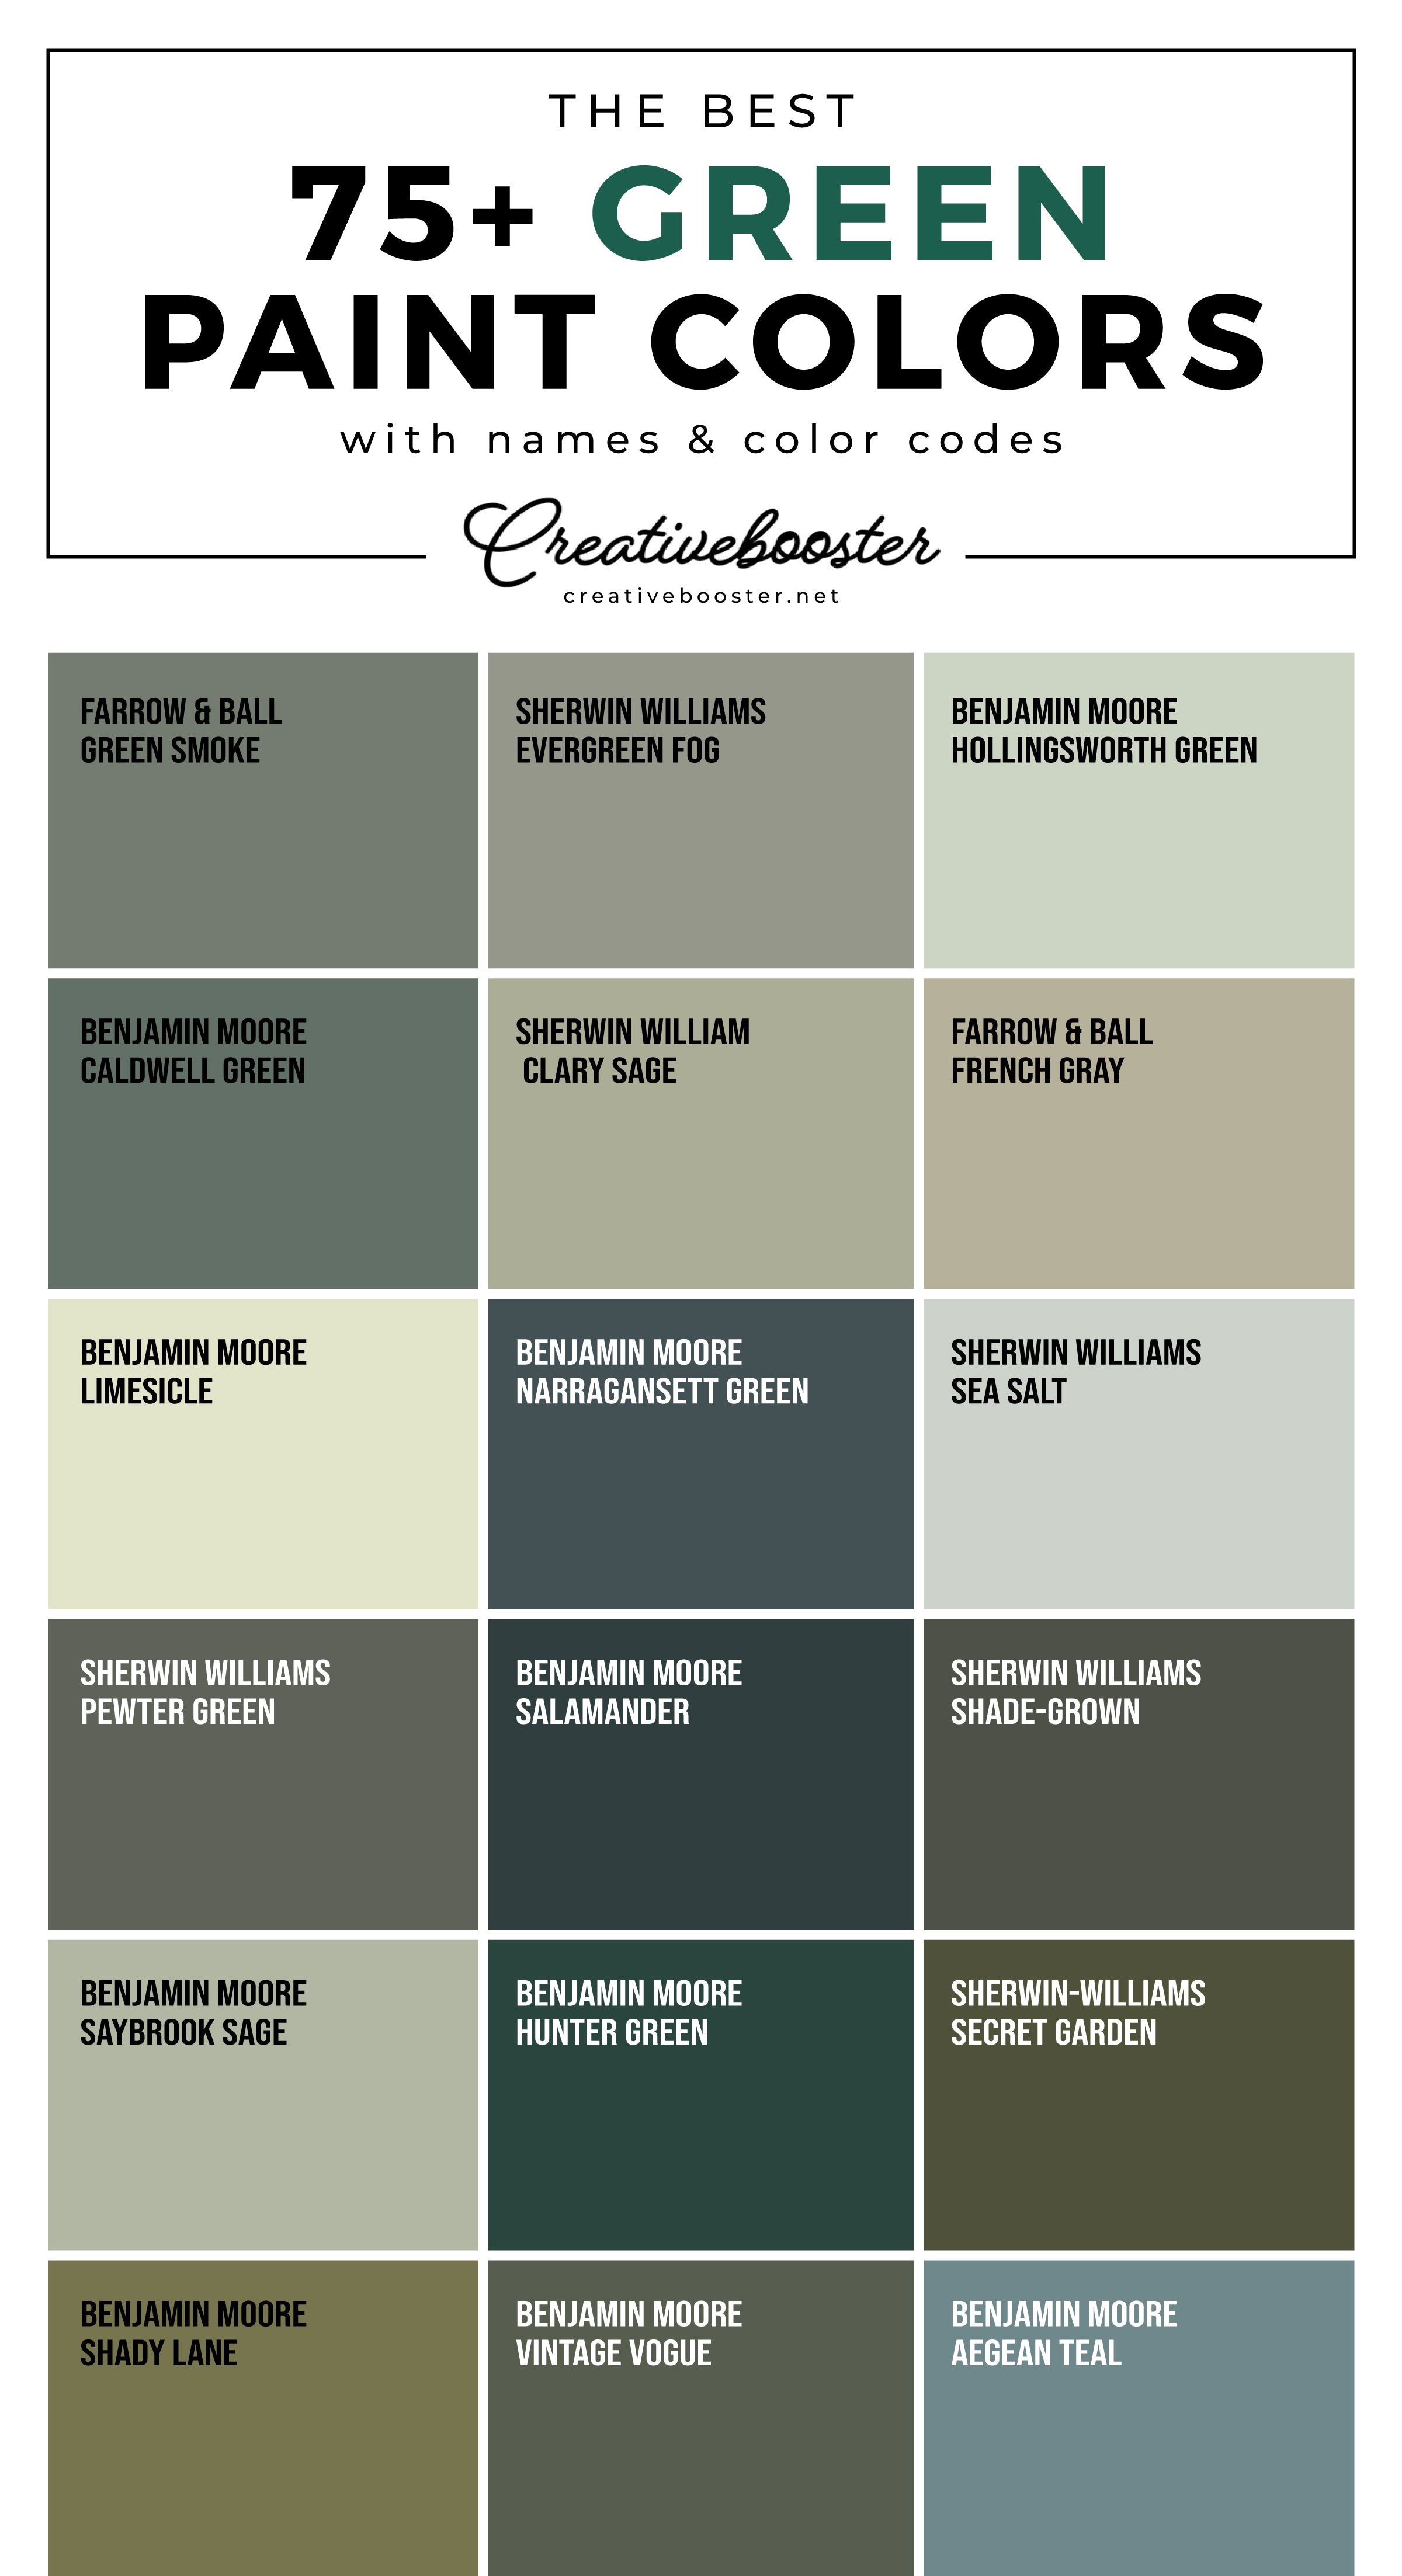 Shades-of-Green-Paint-Colors-chart-with-names-and-brands-sherwin-williams-benjamin-moore-pinterest-tall